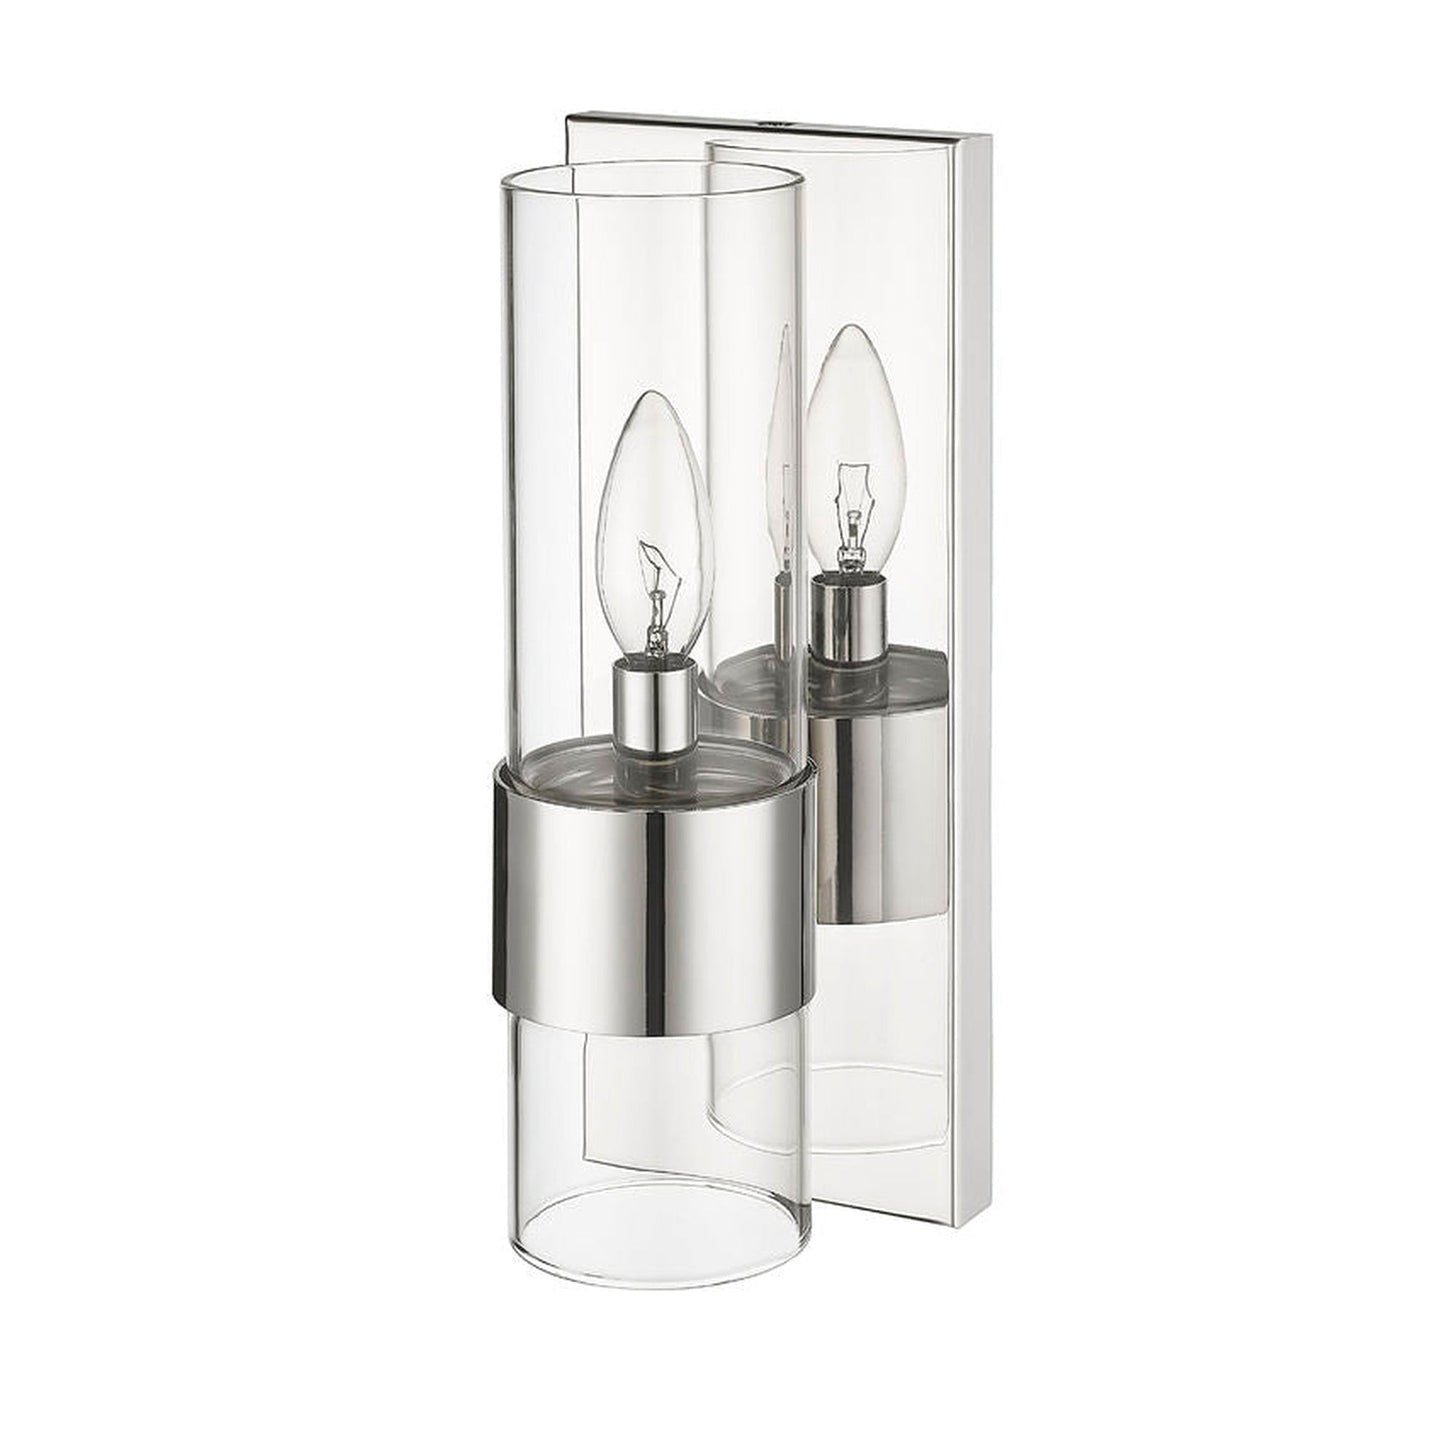 Z-Lite Lawson 5" 1-Light Polished Nickel Wall Sconce With Clear Glass Shade